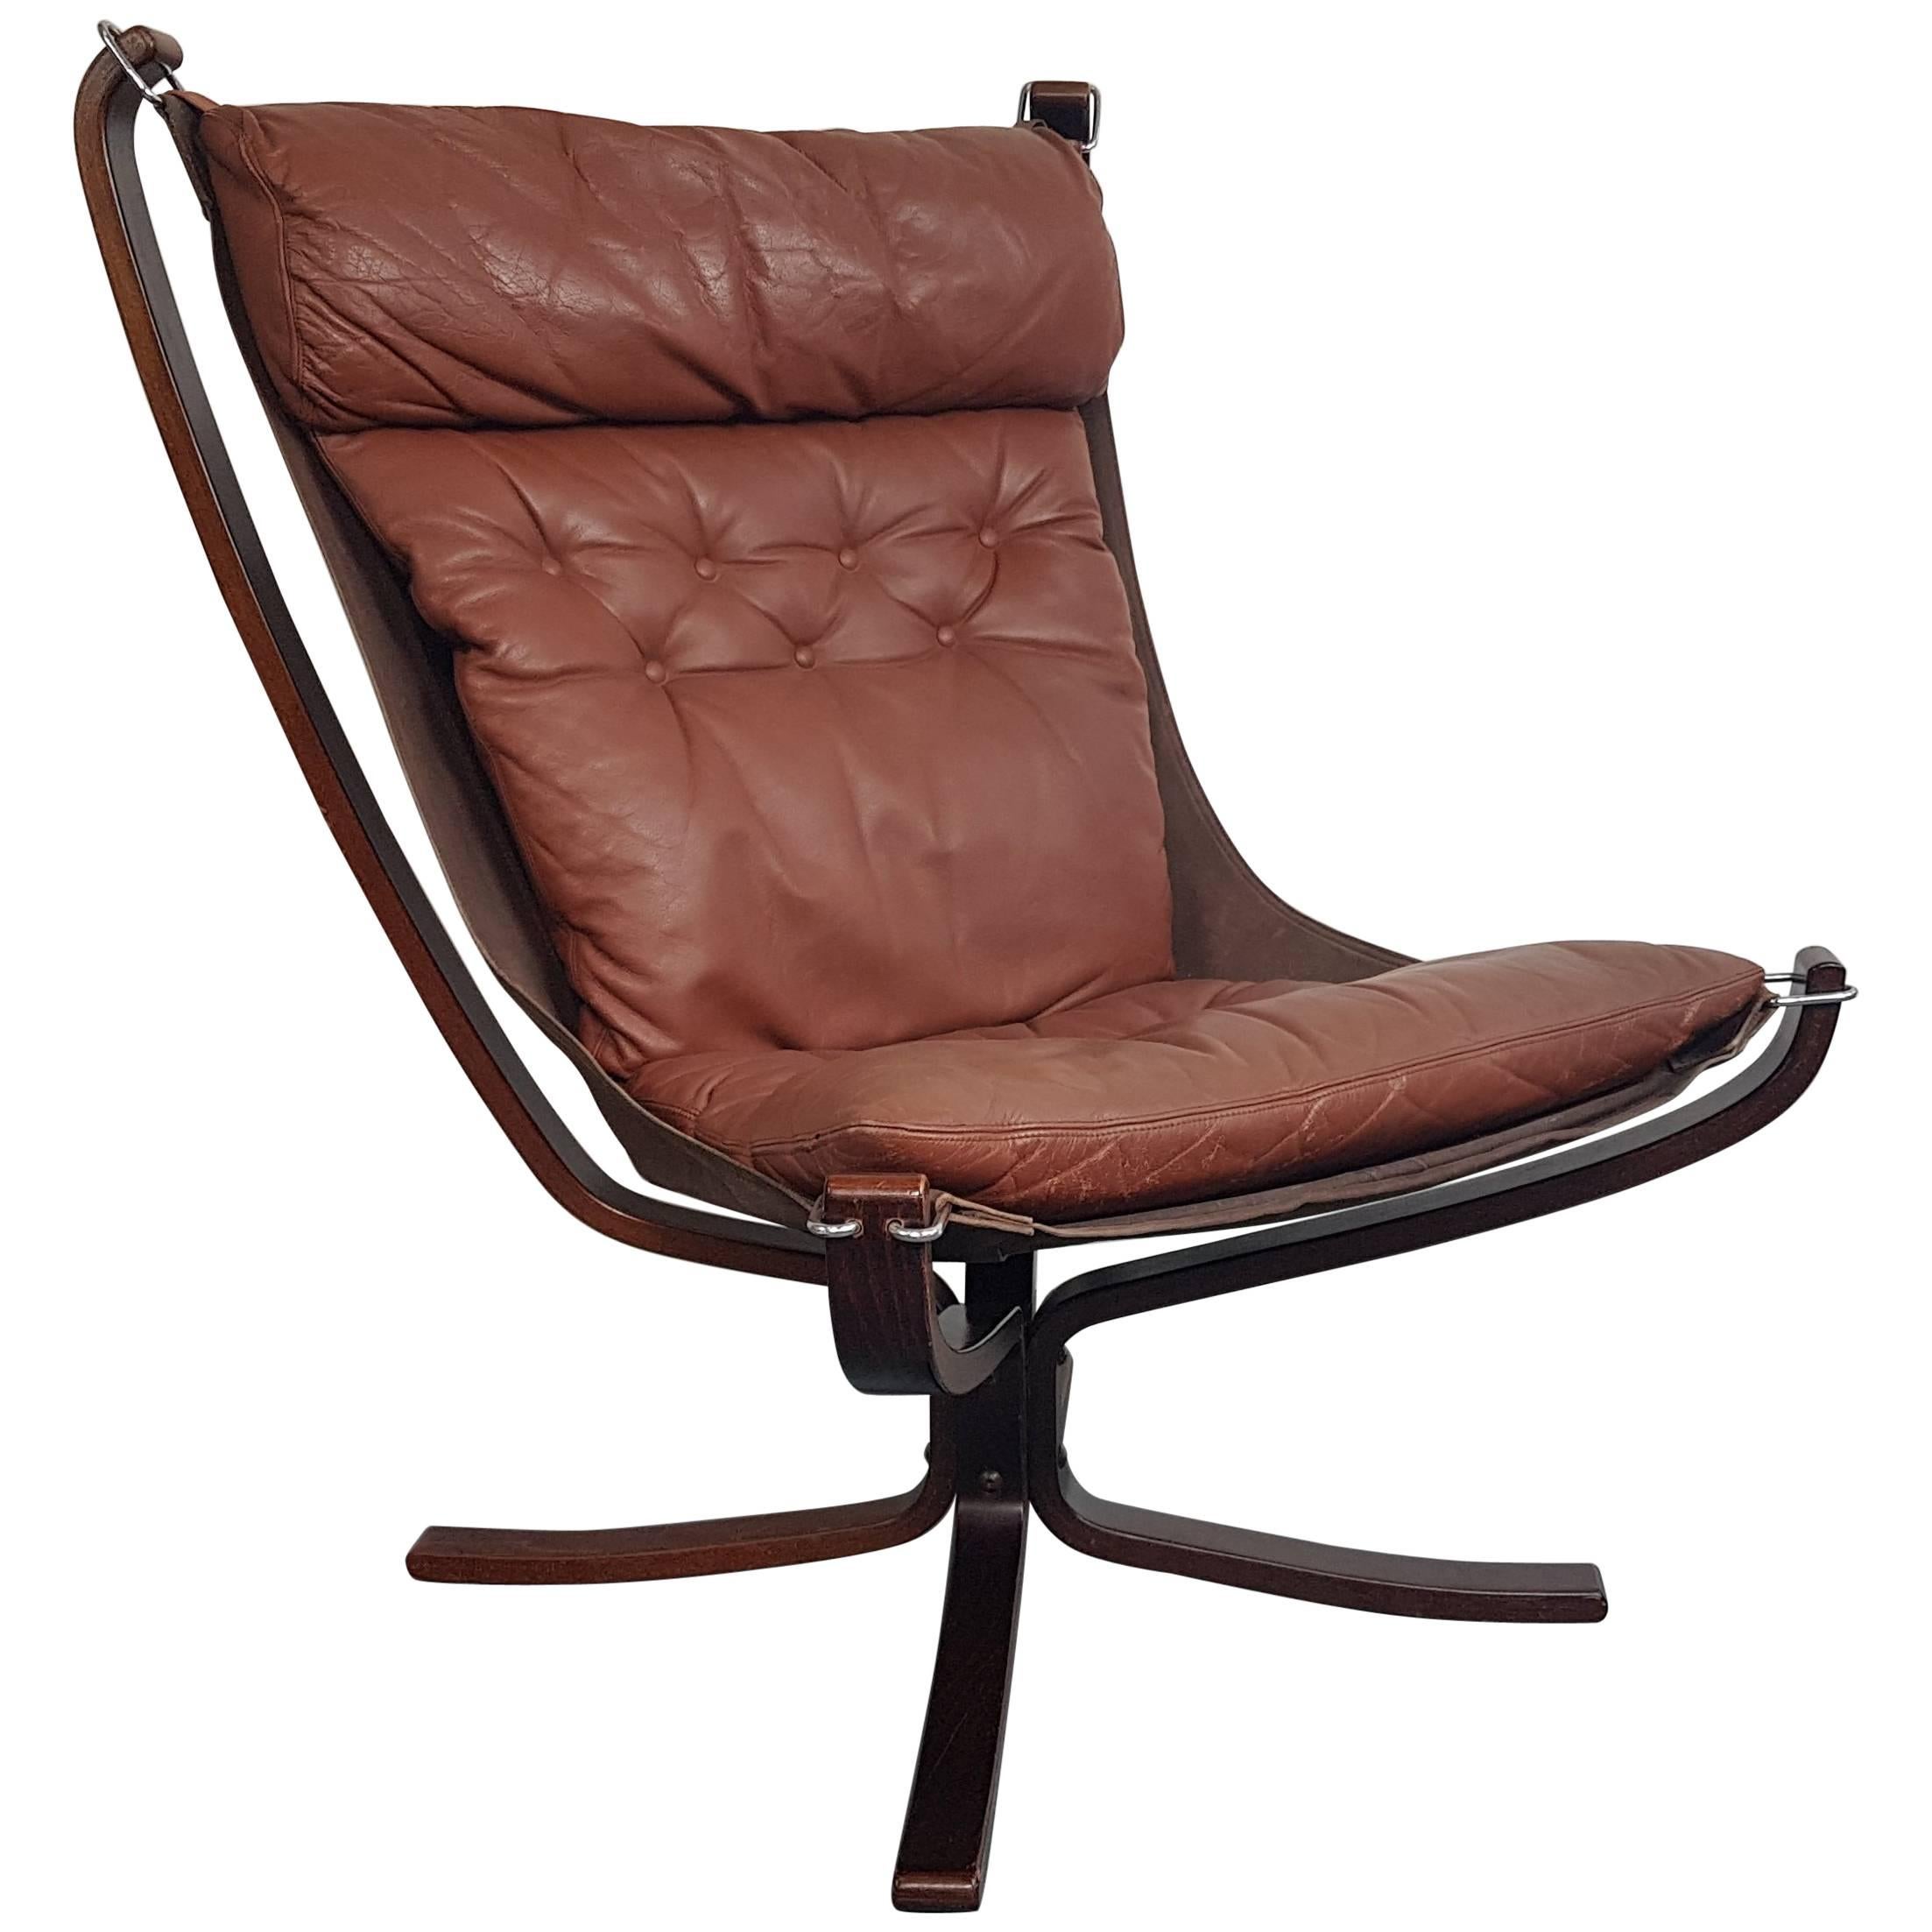 Vintage 1970s High Back Brown Leather Falcon Chair Designed by Sigurd Resell For Sale